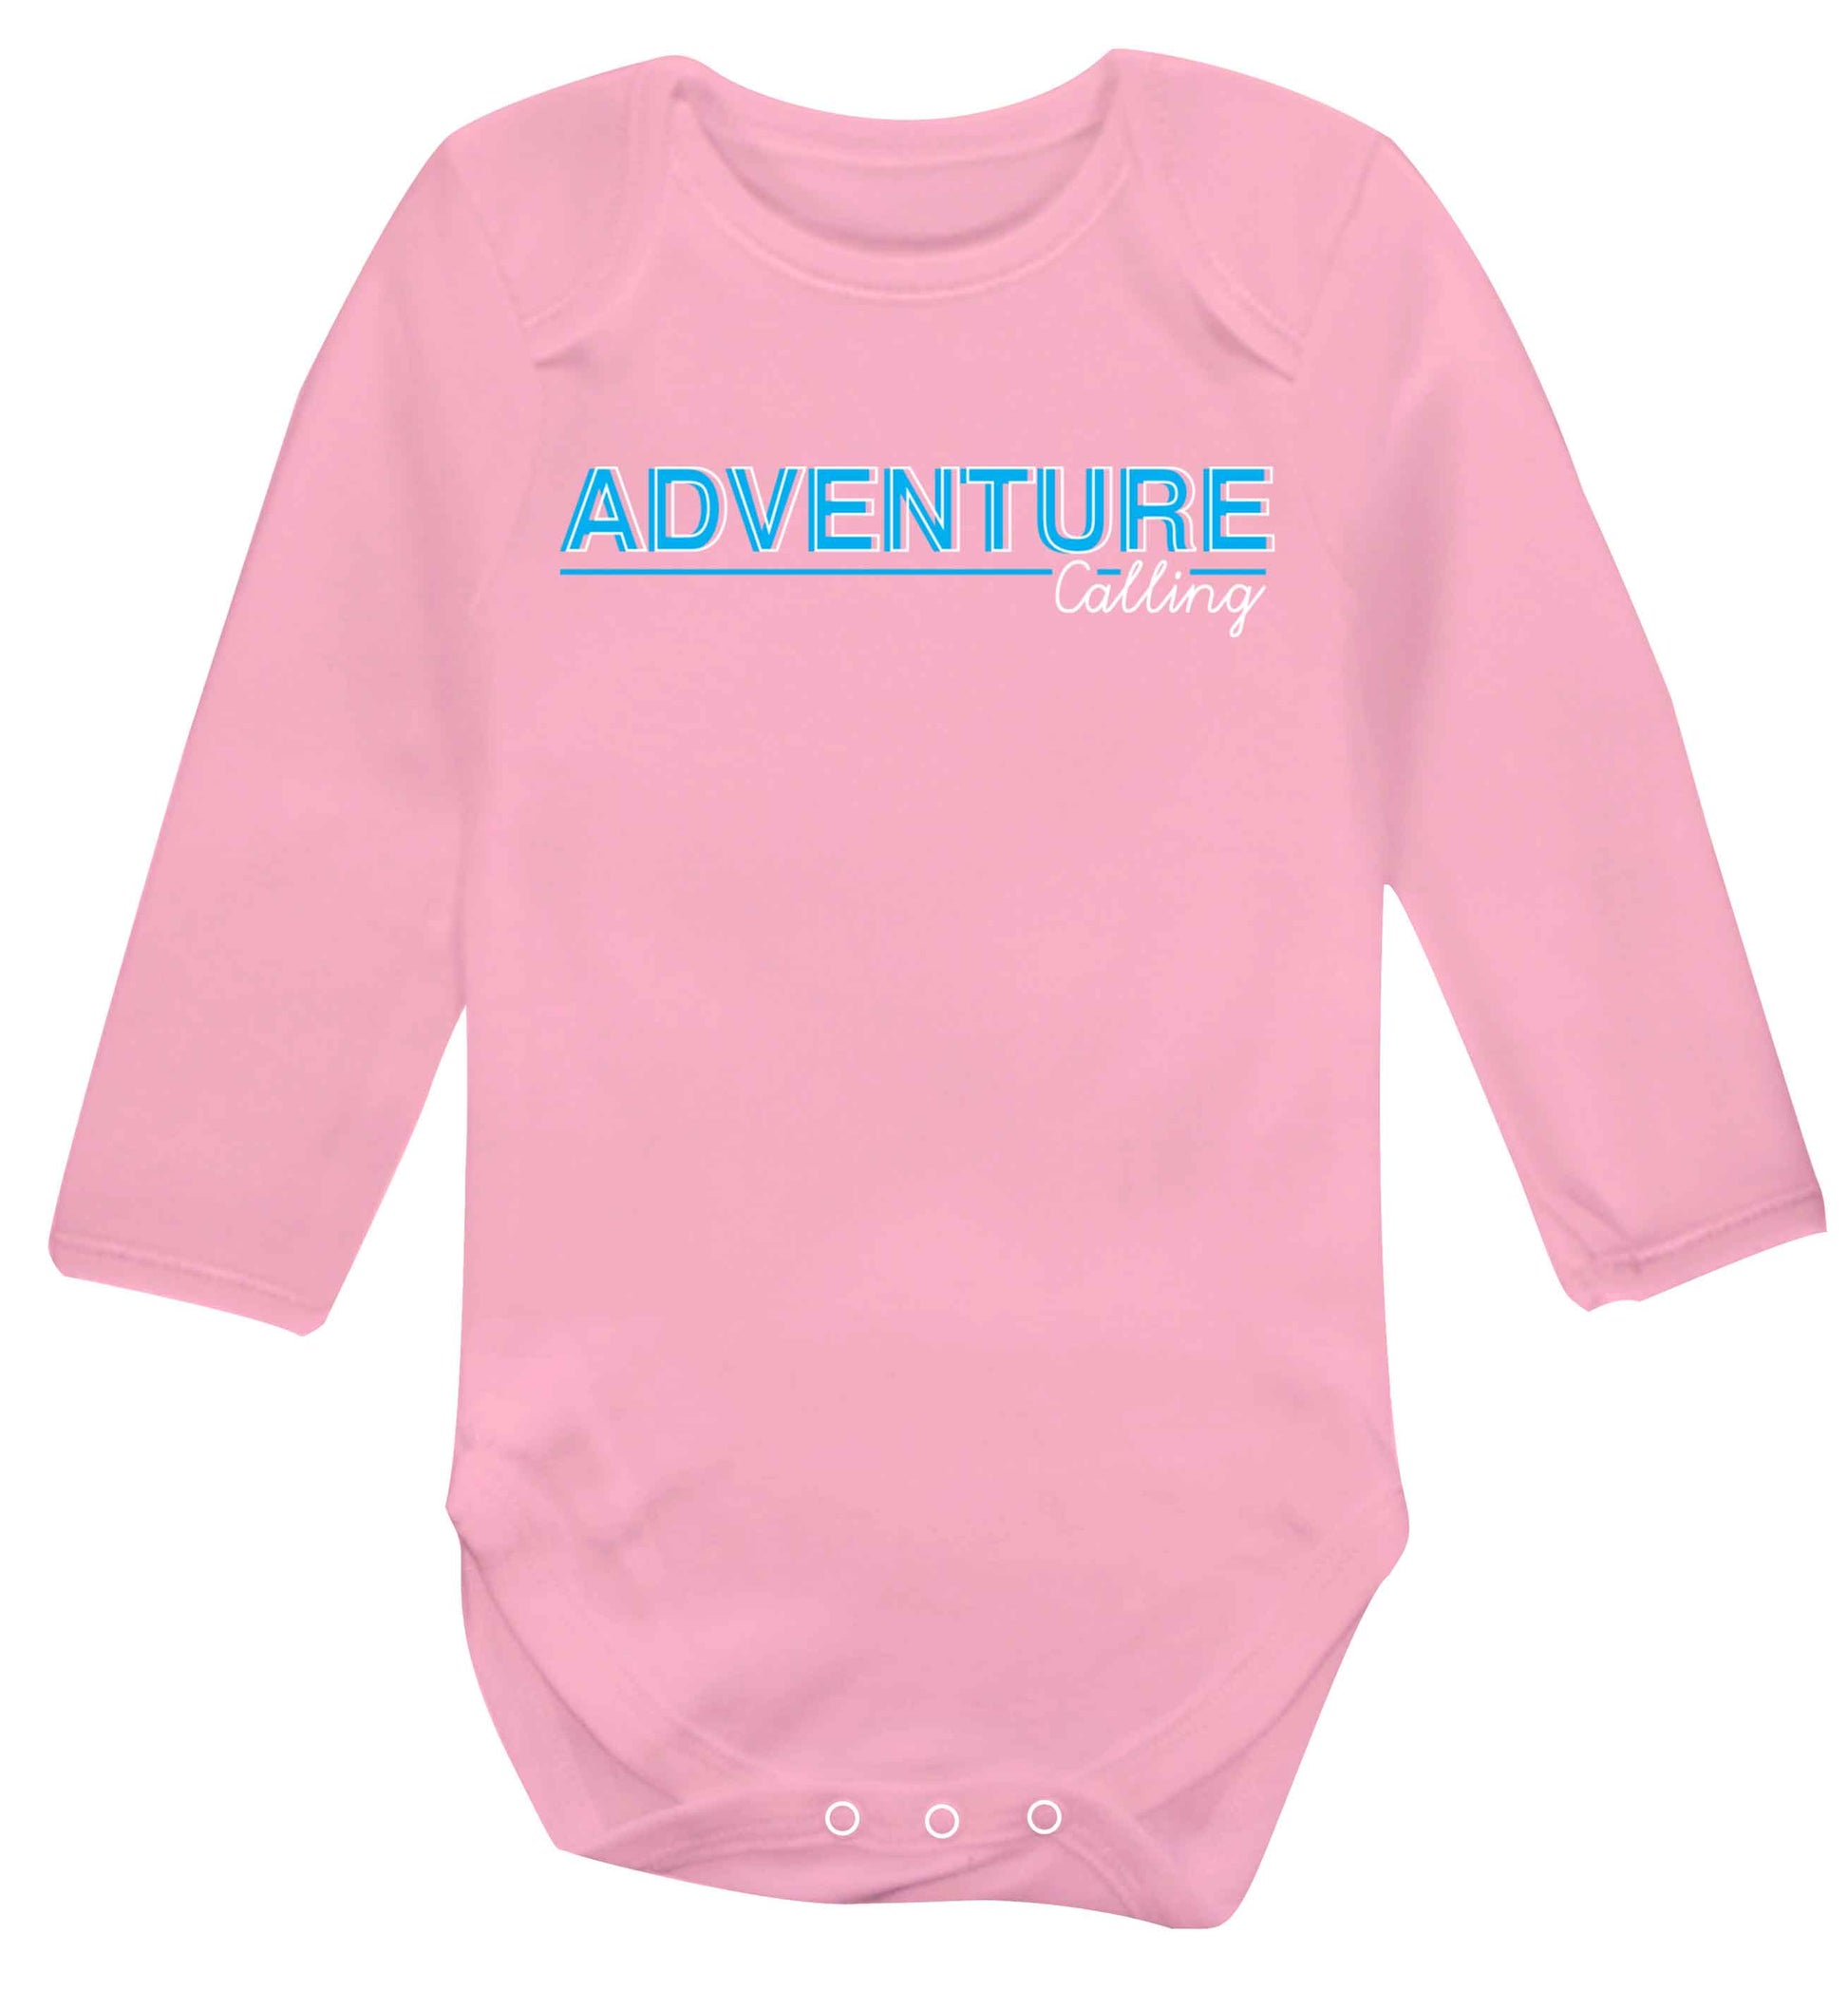 Adventure calling Baby Vest long sleeved pale pink 6-12 months